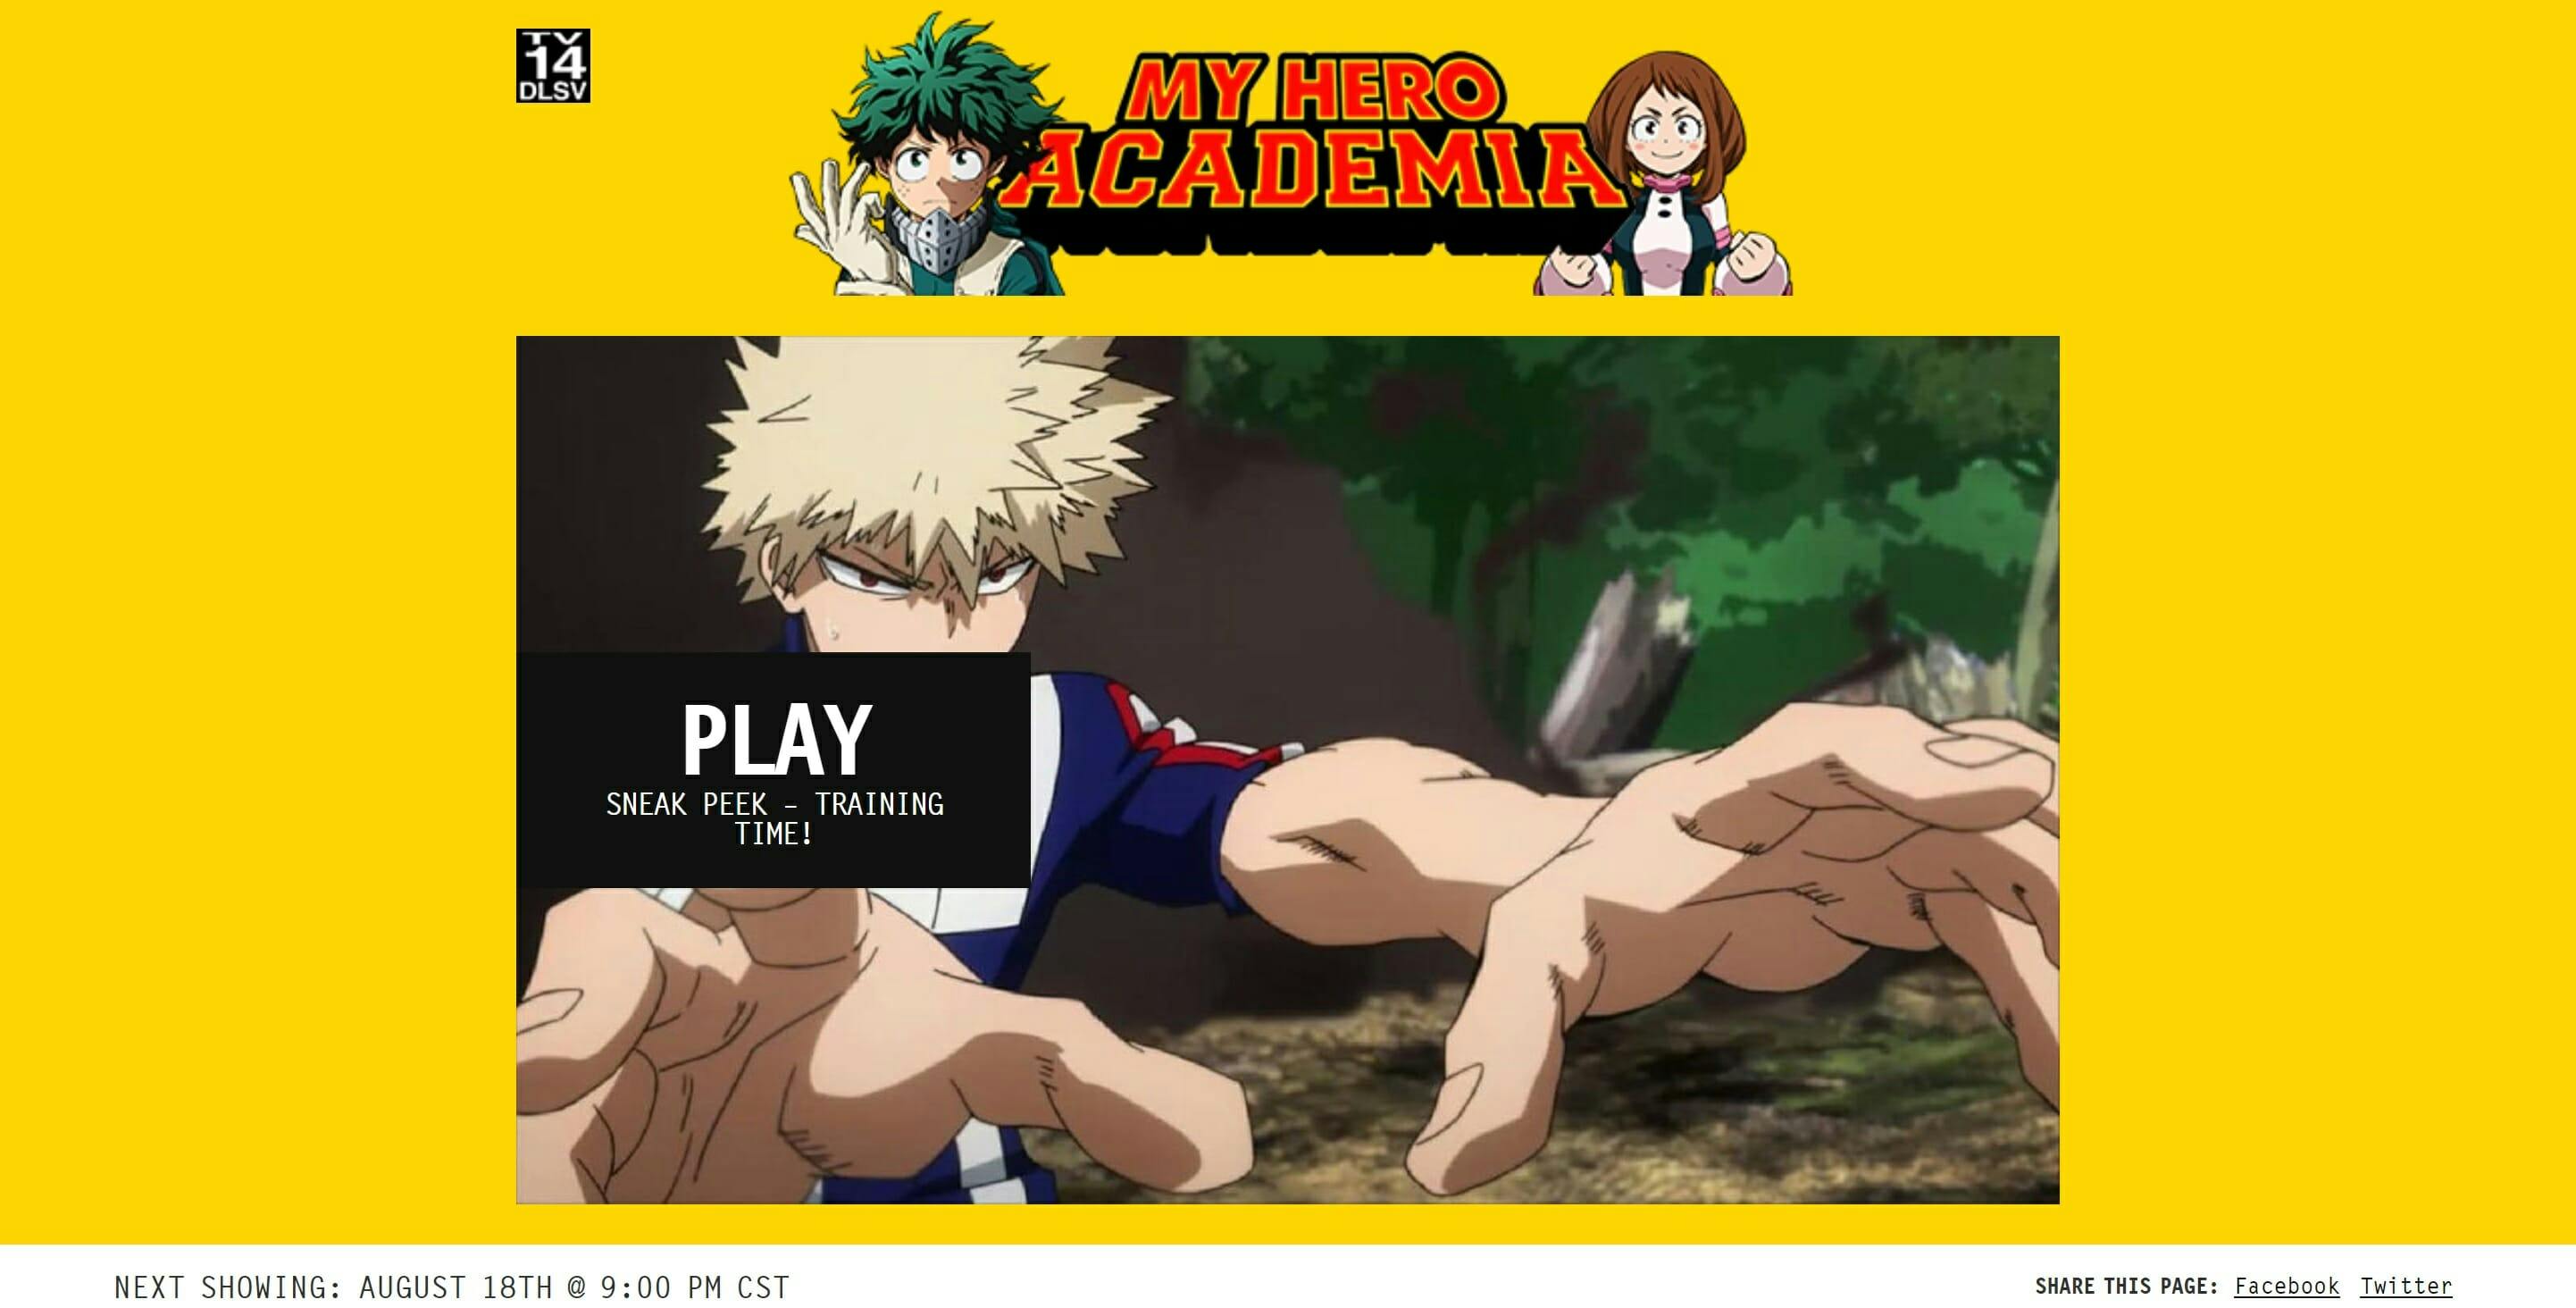 HOW TO WATCH Boku no Hero Academia? Dubbed and subtitled? NETFLIX